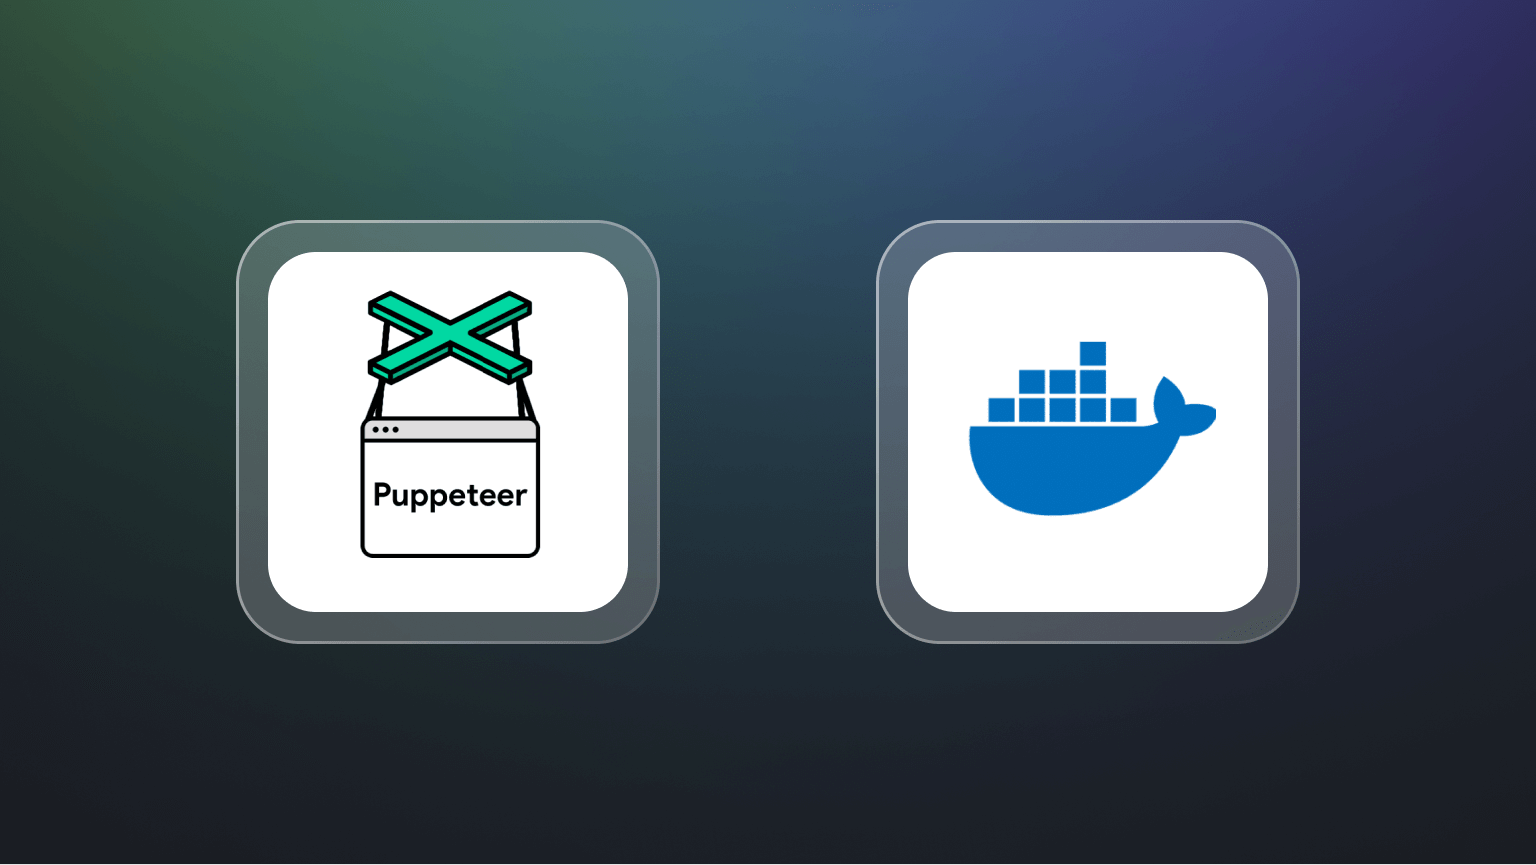 How to run Puppeteer in a Docker container